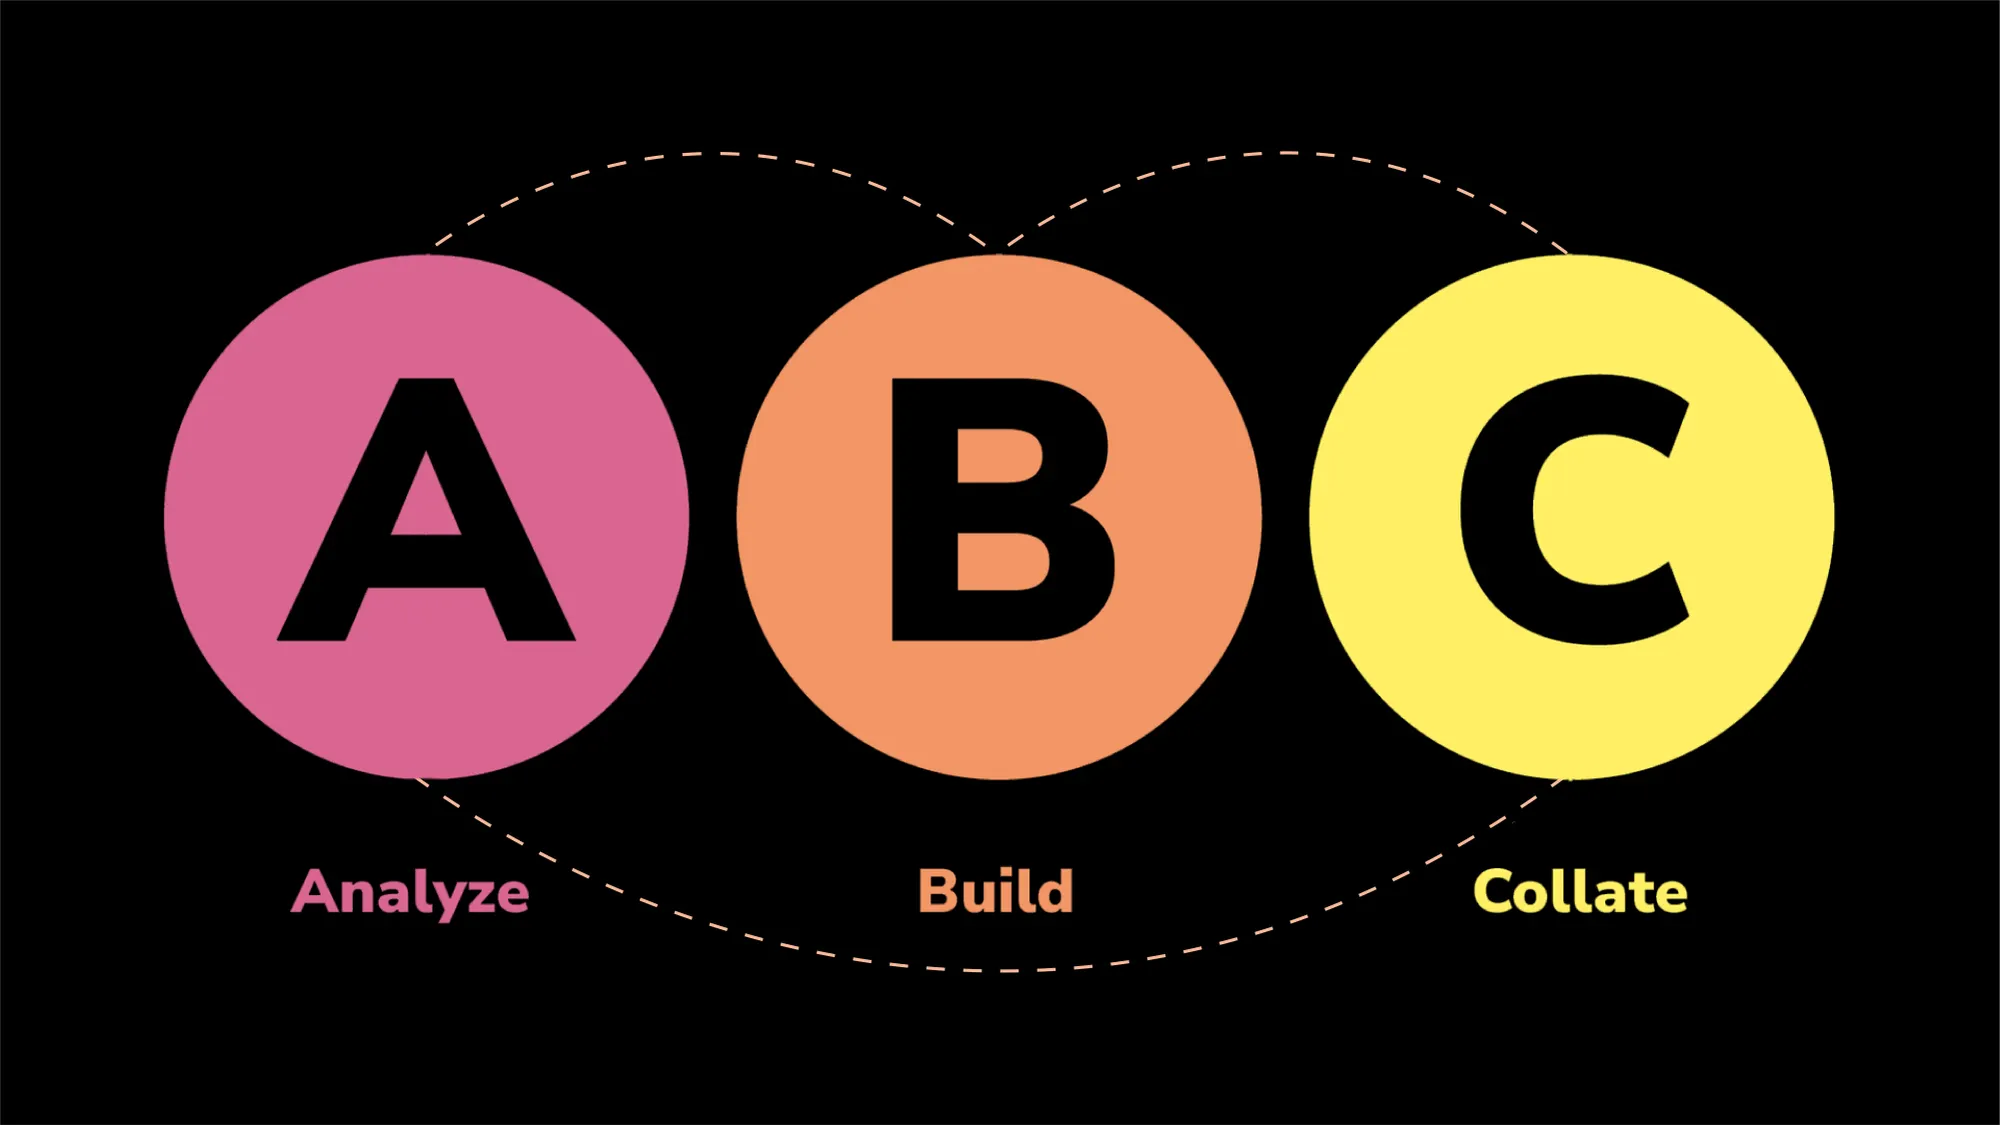 Image of ABC: Analyze, Build, Collate. 